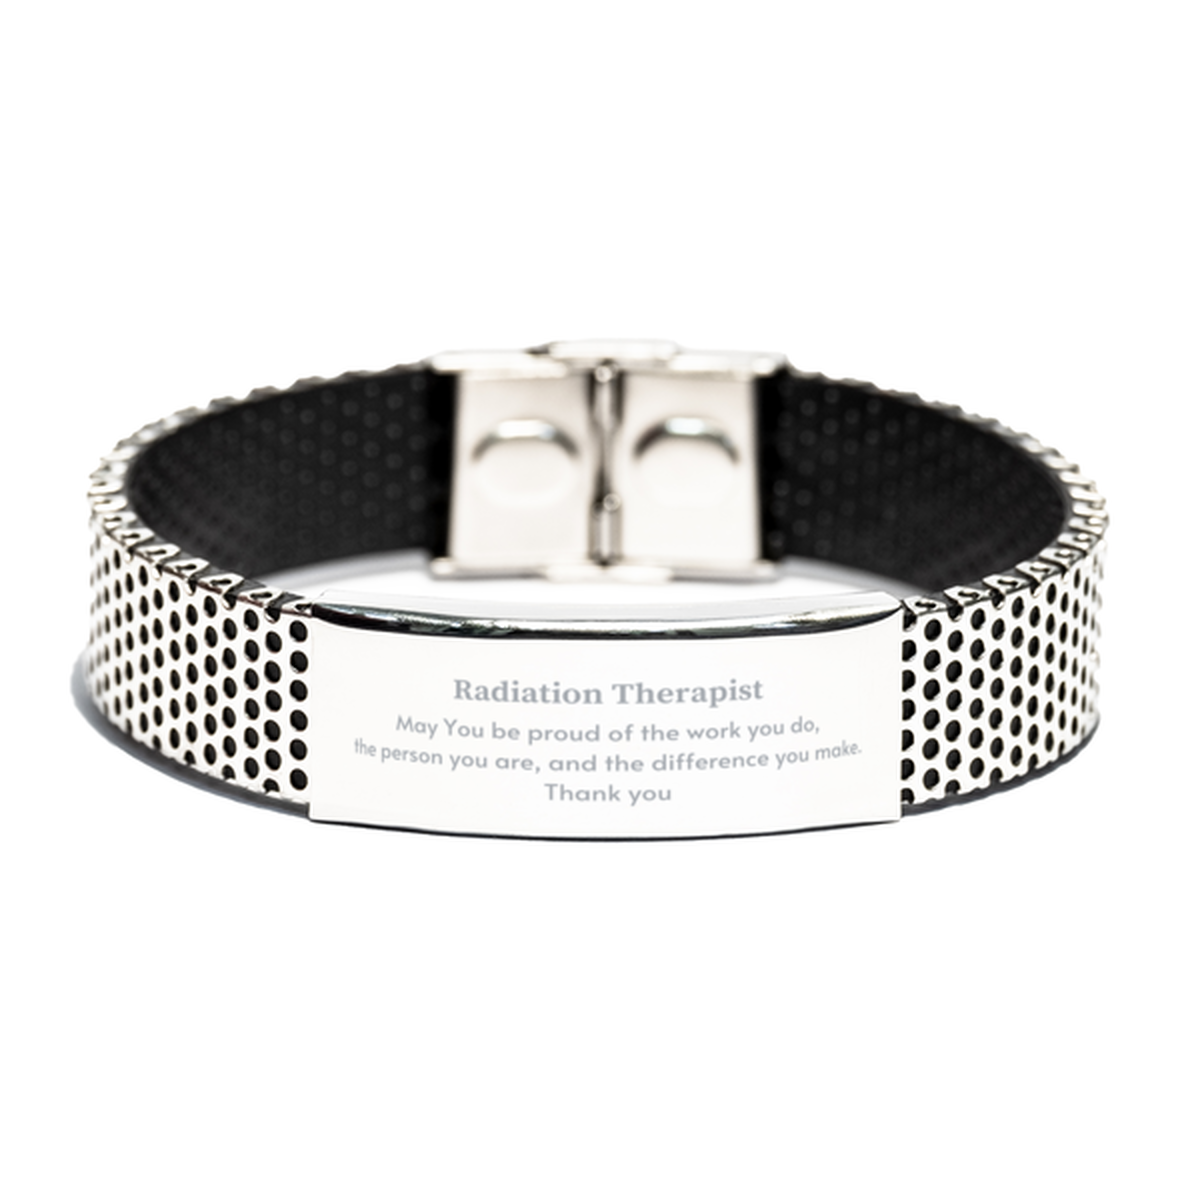 Heartwarming Stainless Steel Bracelet Retirement Coworkers Gifts for Radiation Therapist, Radiation Therapist May You be proud of the work you do, the person you are Gifts for Boss Men Women Friends